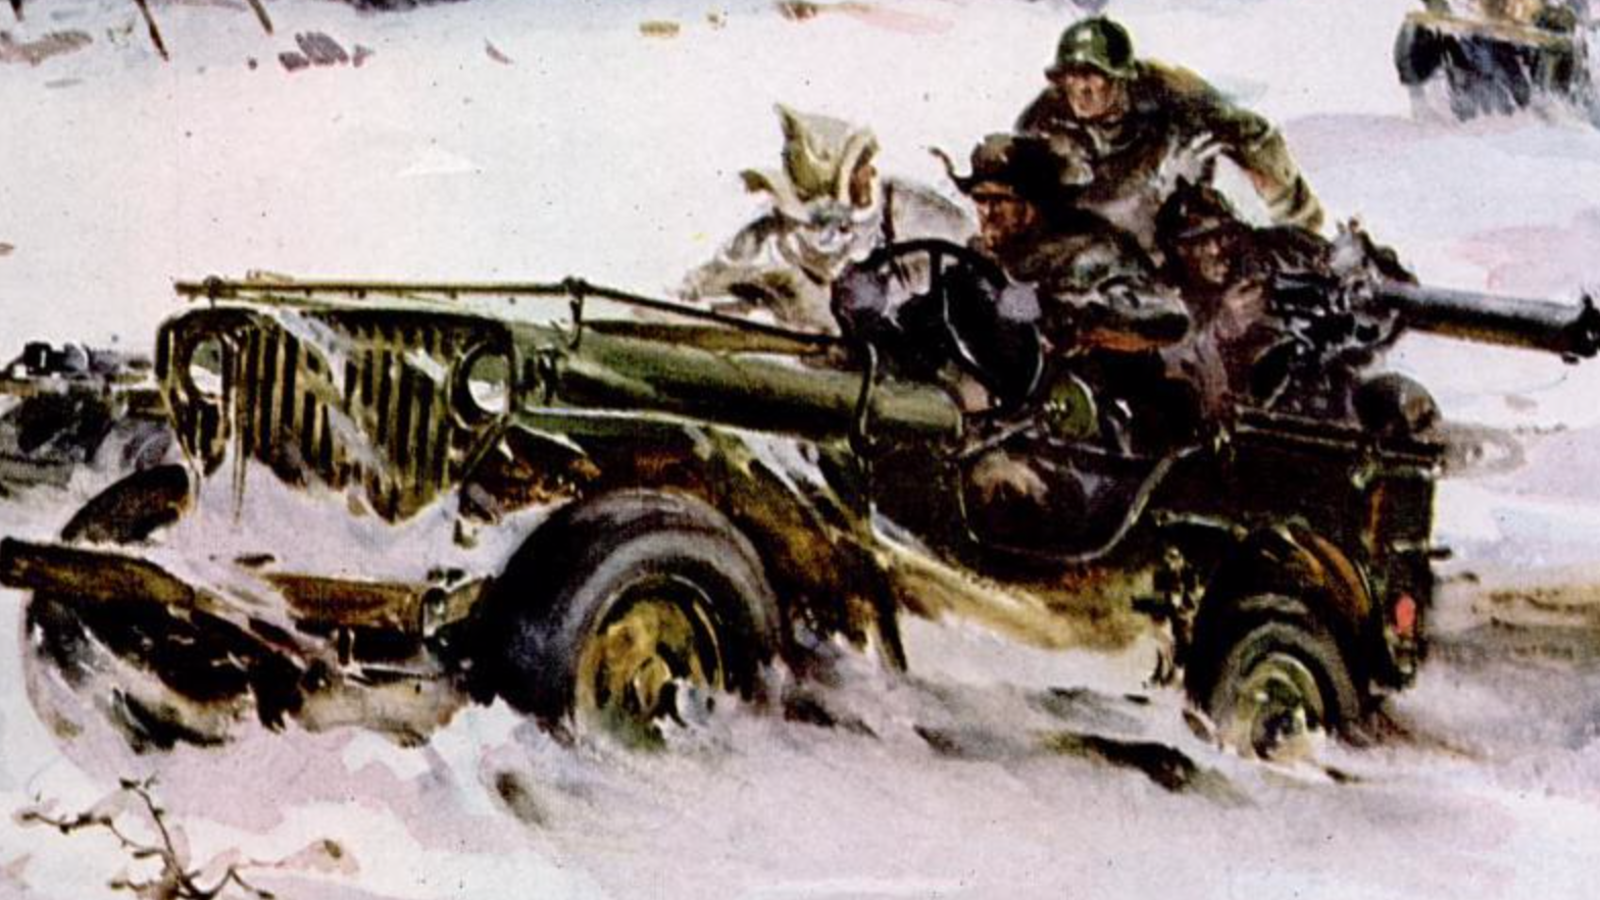 Illustration for article titled Willys Ads, WWII